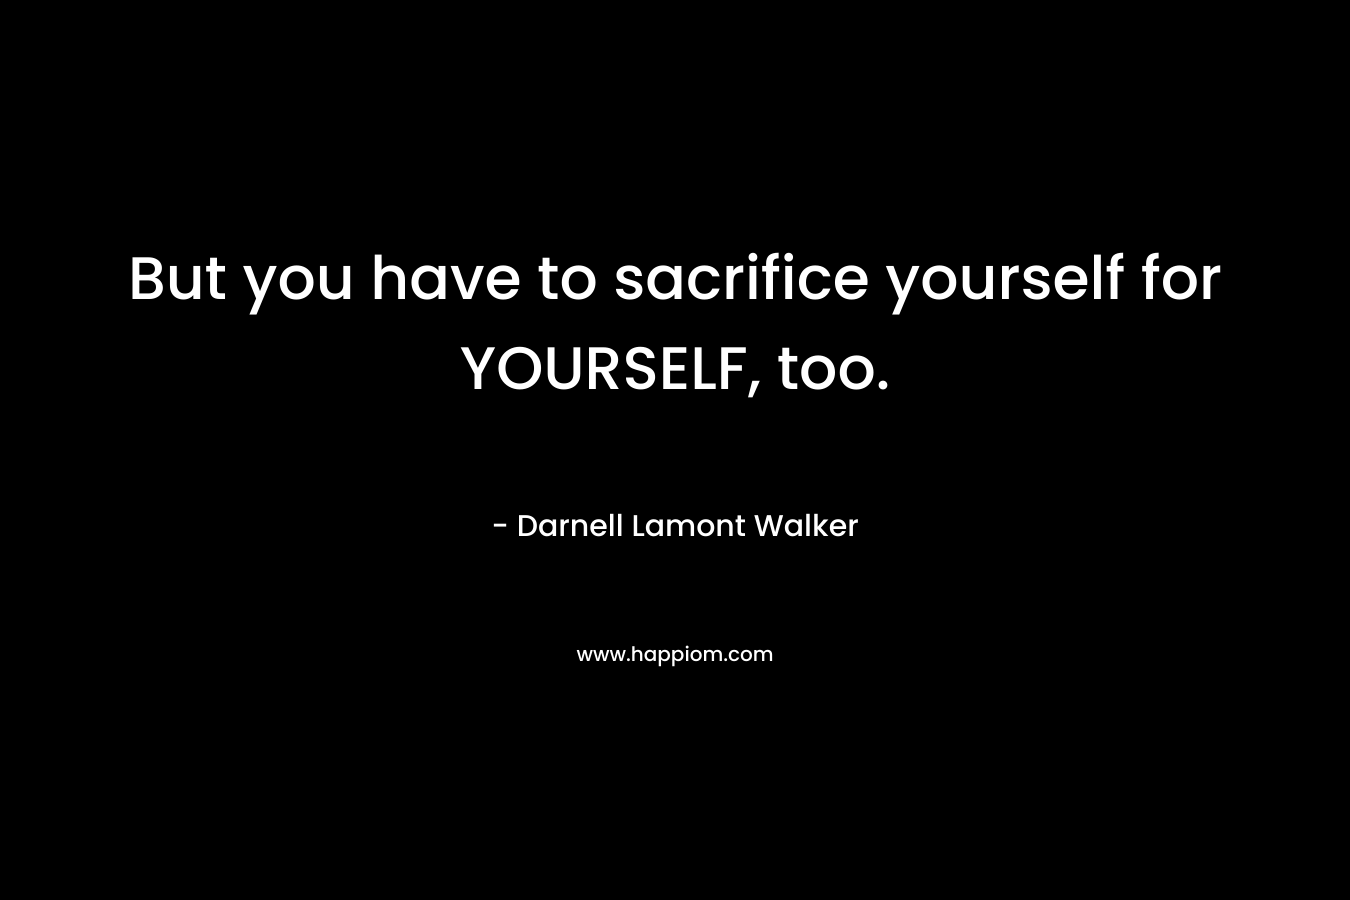 But you have to sacrifice yourself for YOURSELF, too.